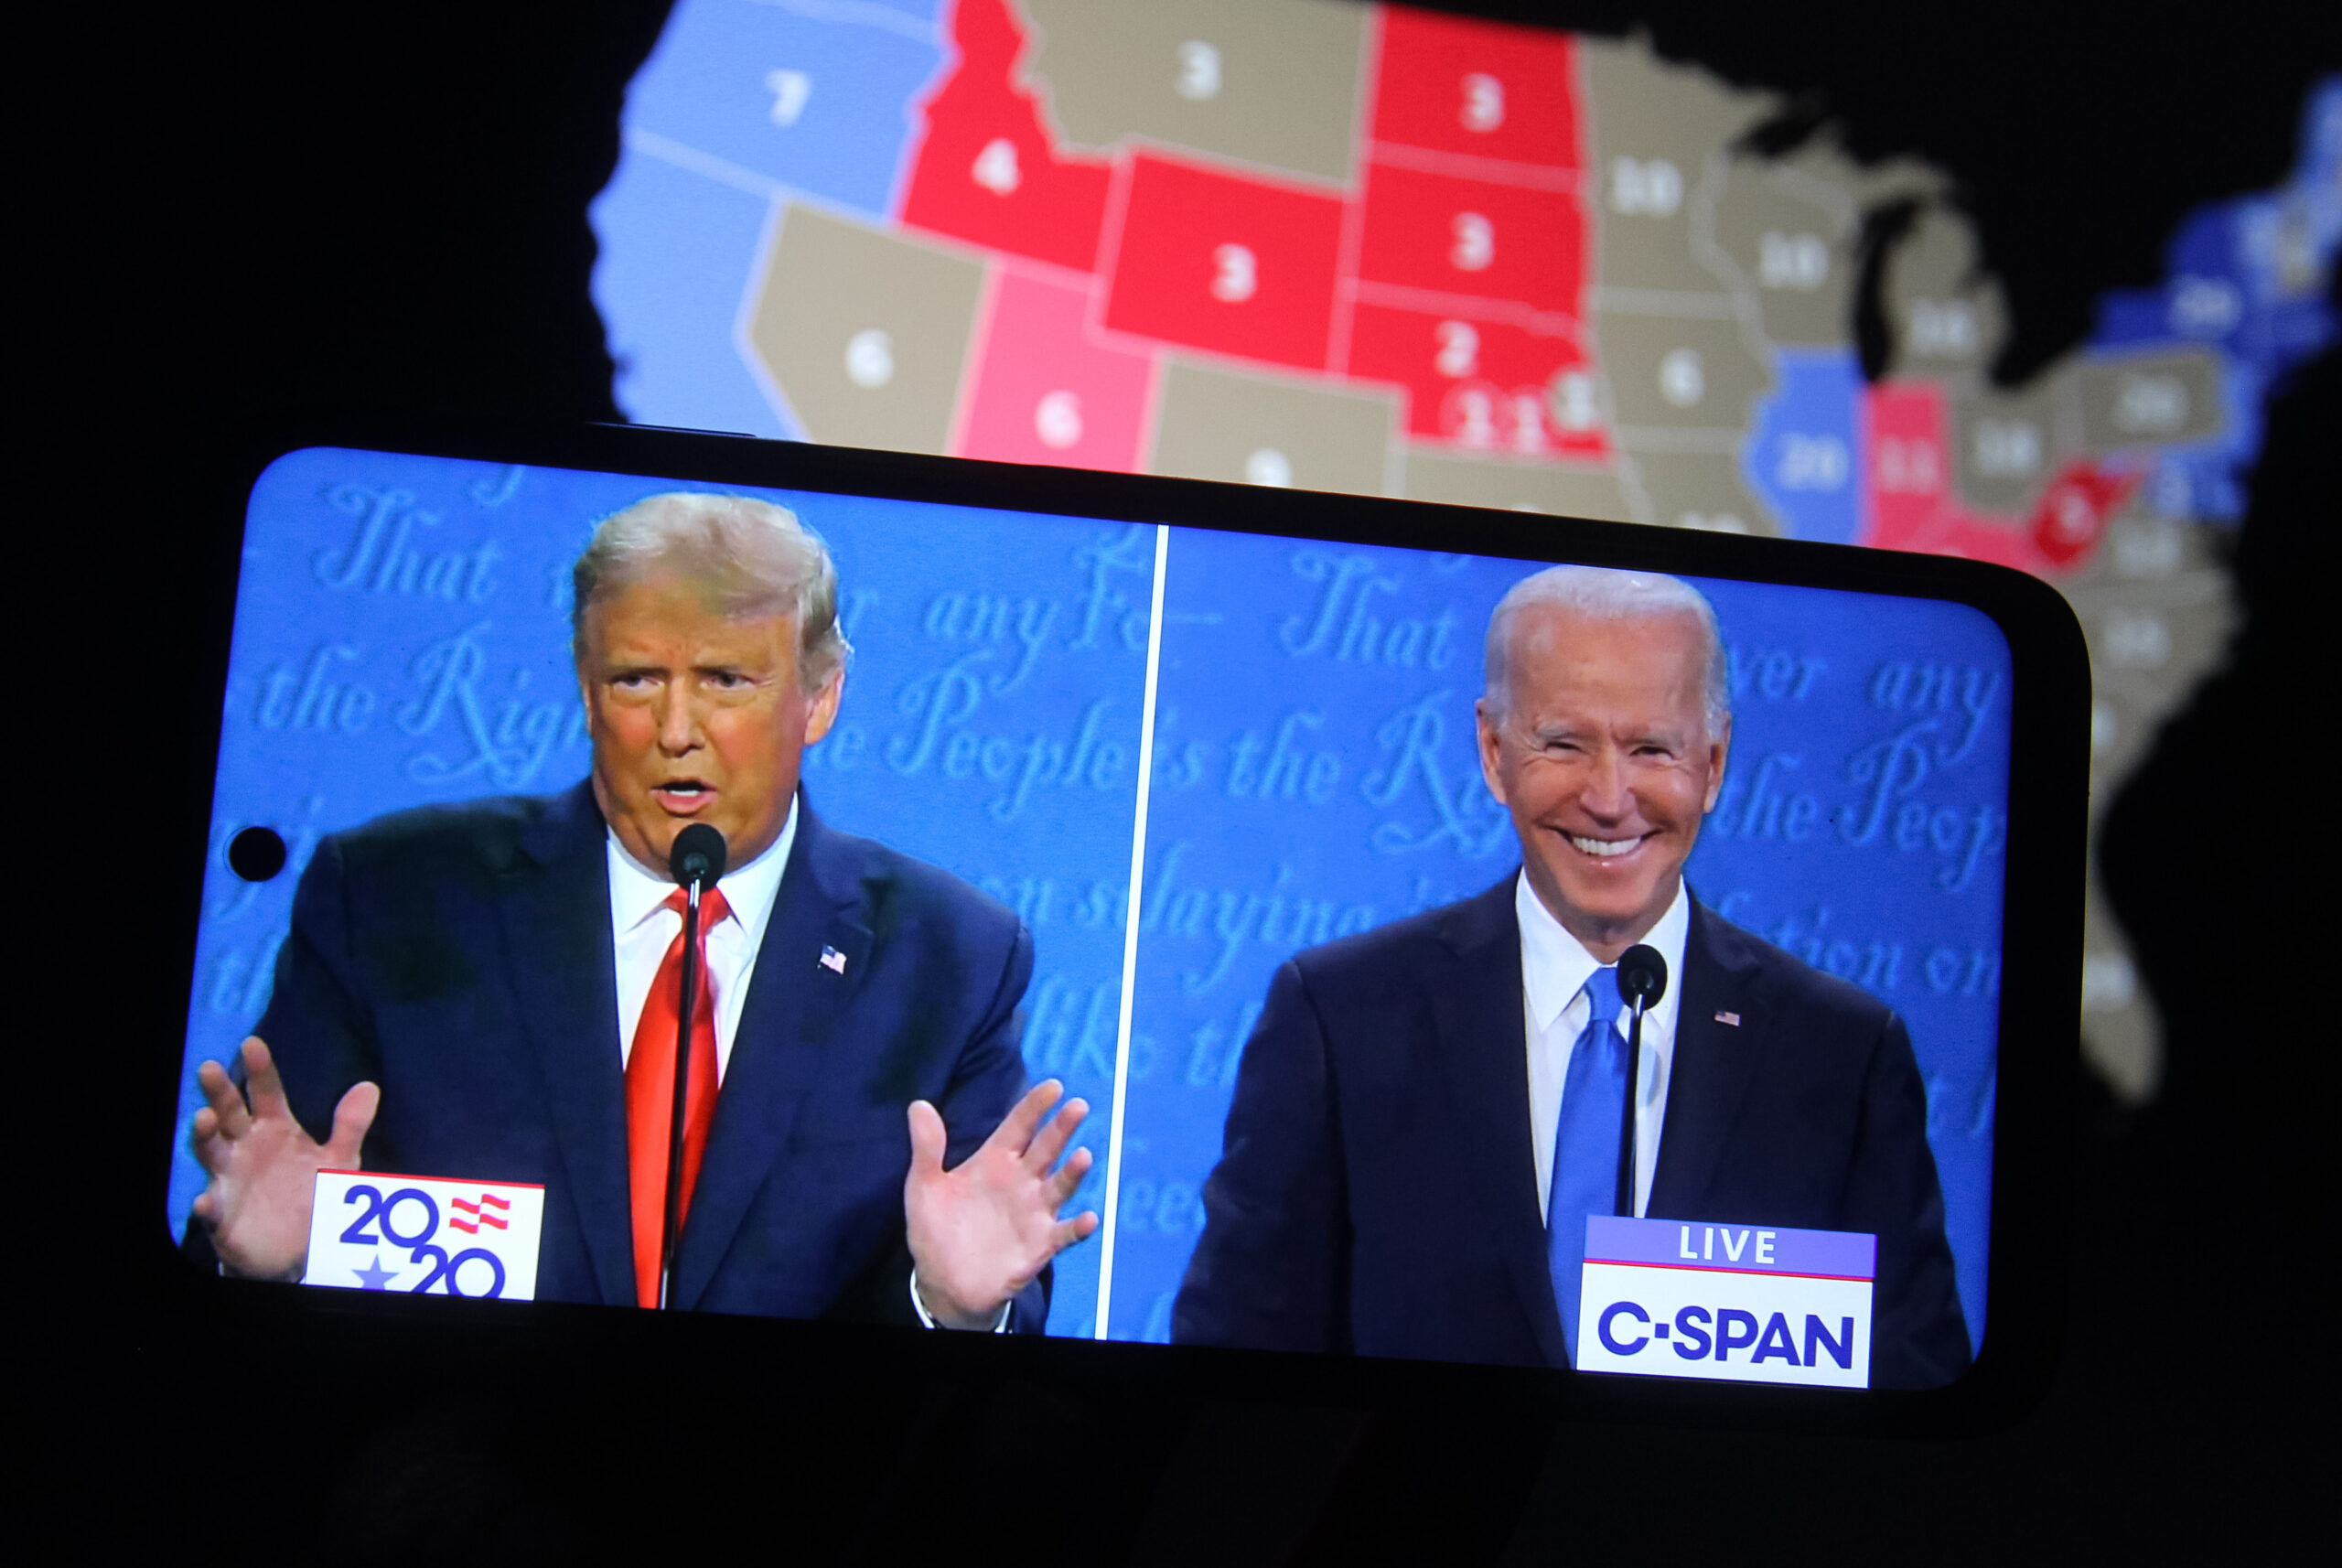 Official Election Update: Joe Biden Is In The Lead But There Are Still Votes To Be Counted